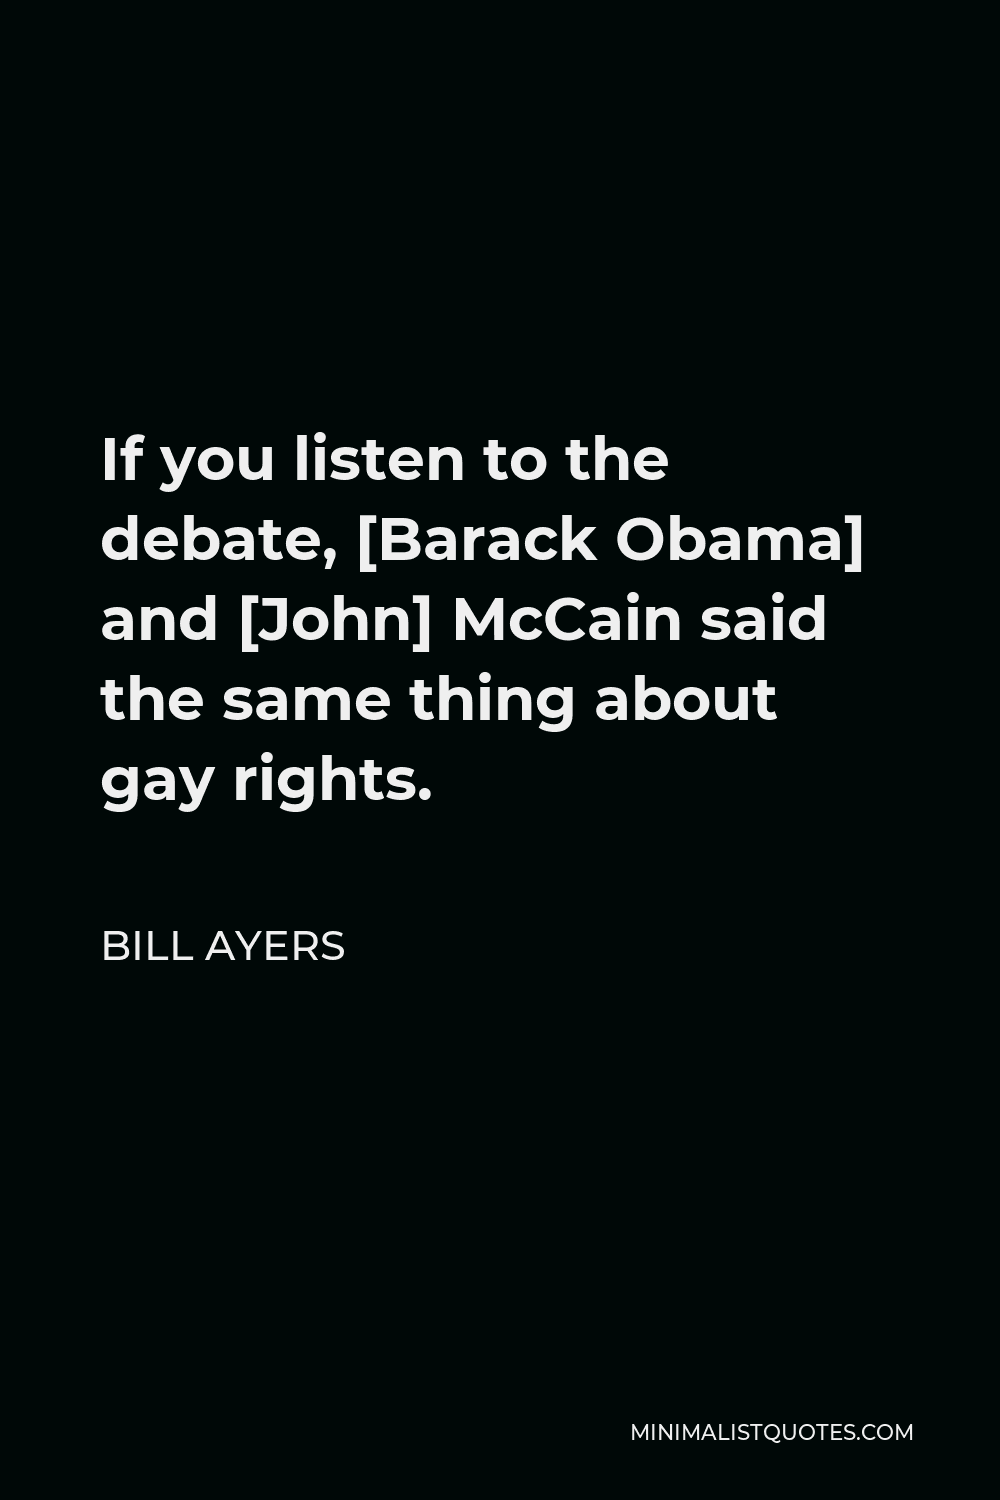 Bill Ayers Quote - If you listen to the debate, [Barack Obama] and [John] McCain said the same thing about gay rights.